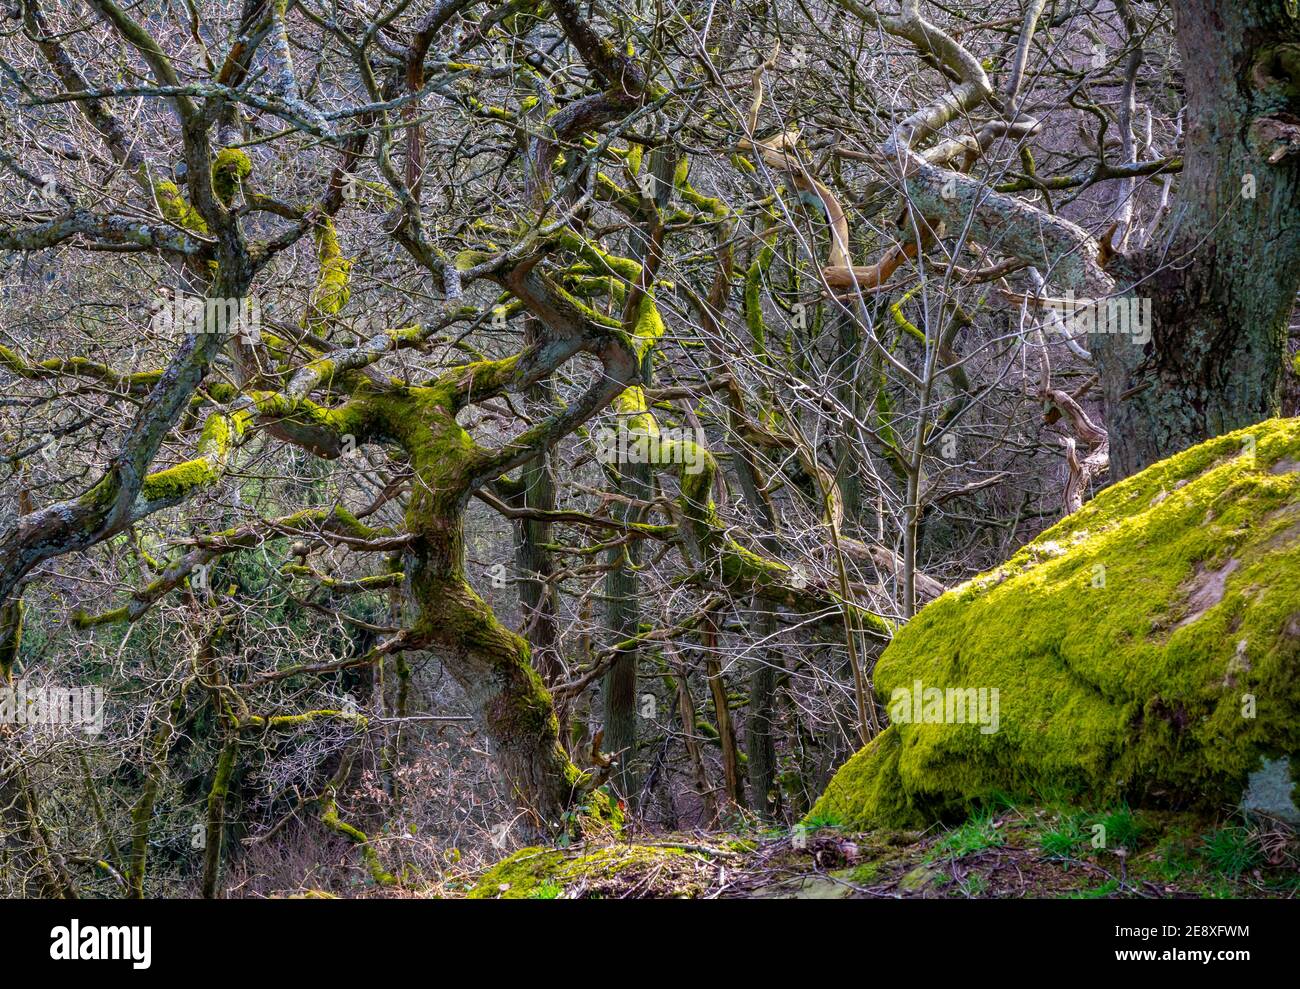 Twisted trees growing in dense woodland with moss covered rock in foreground. Stock Photo